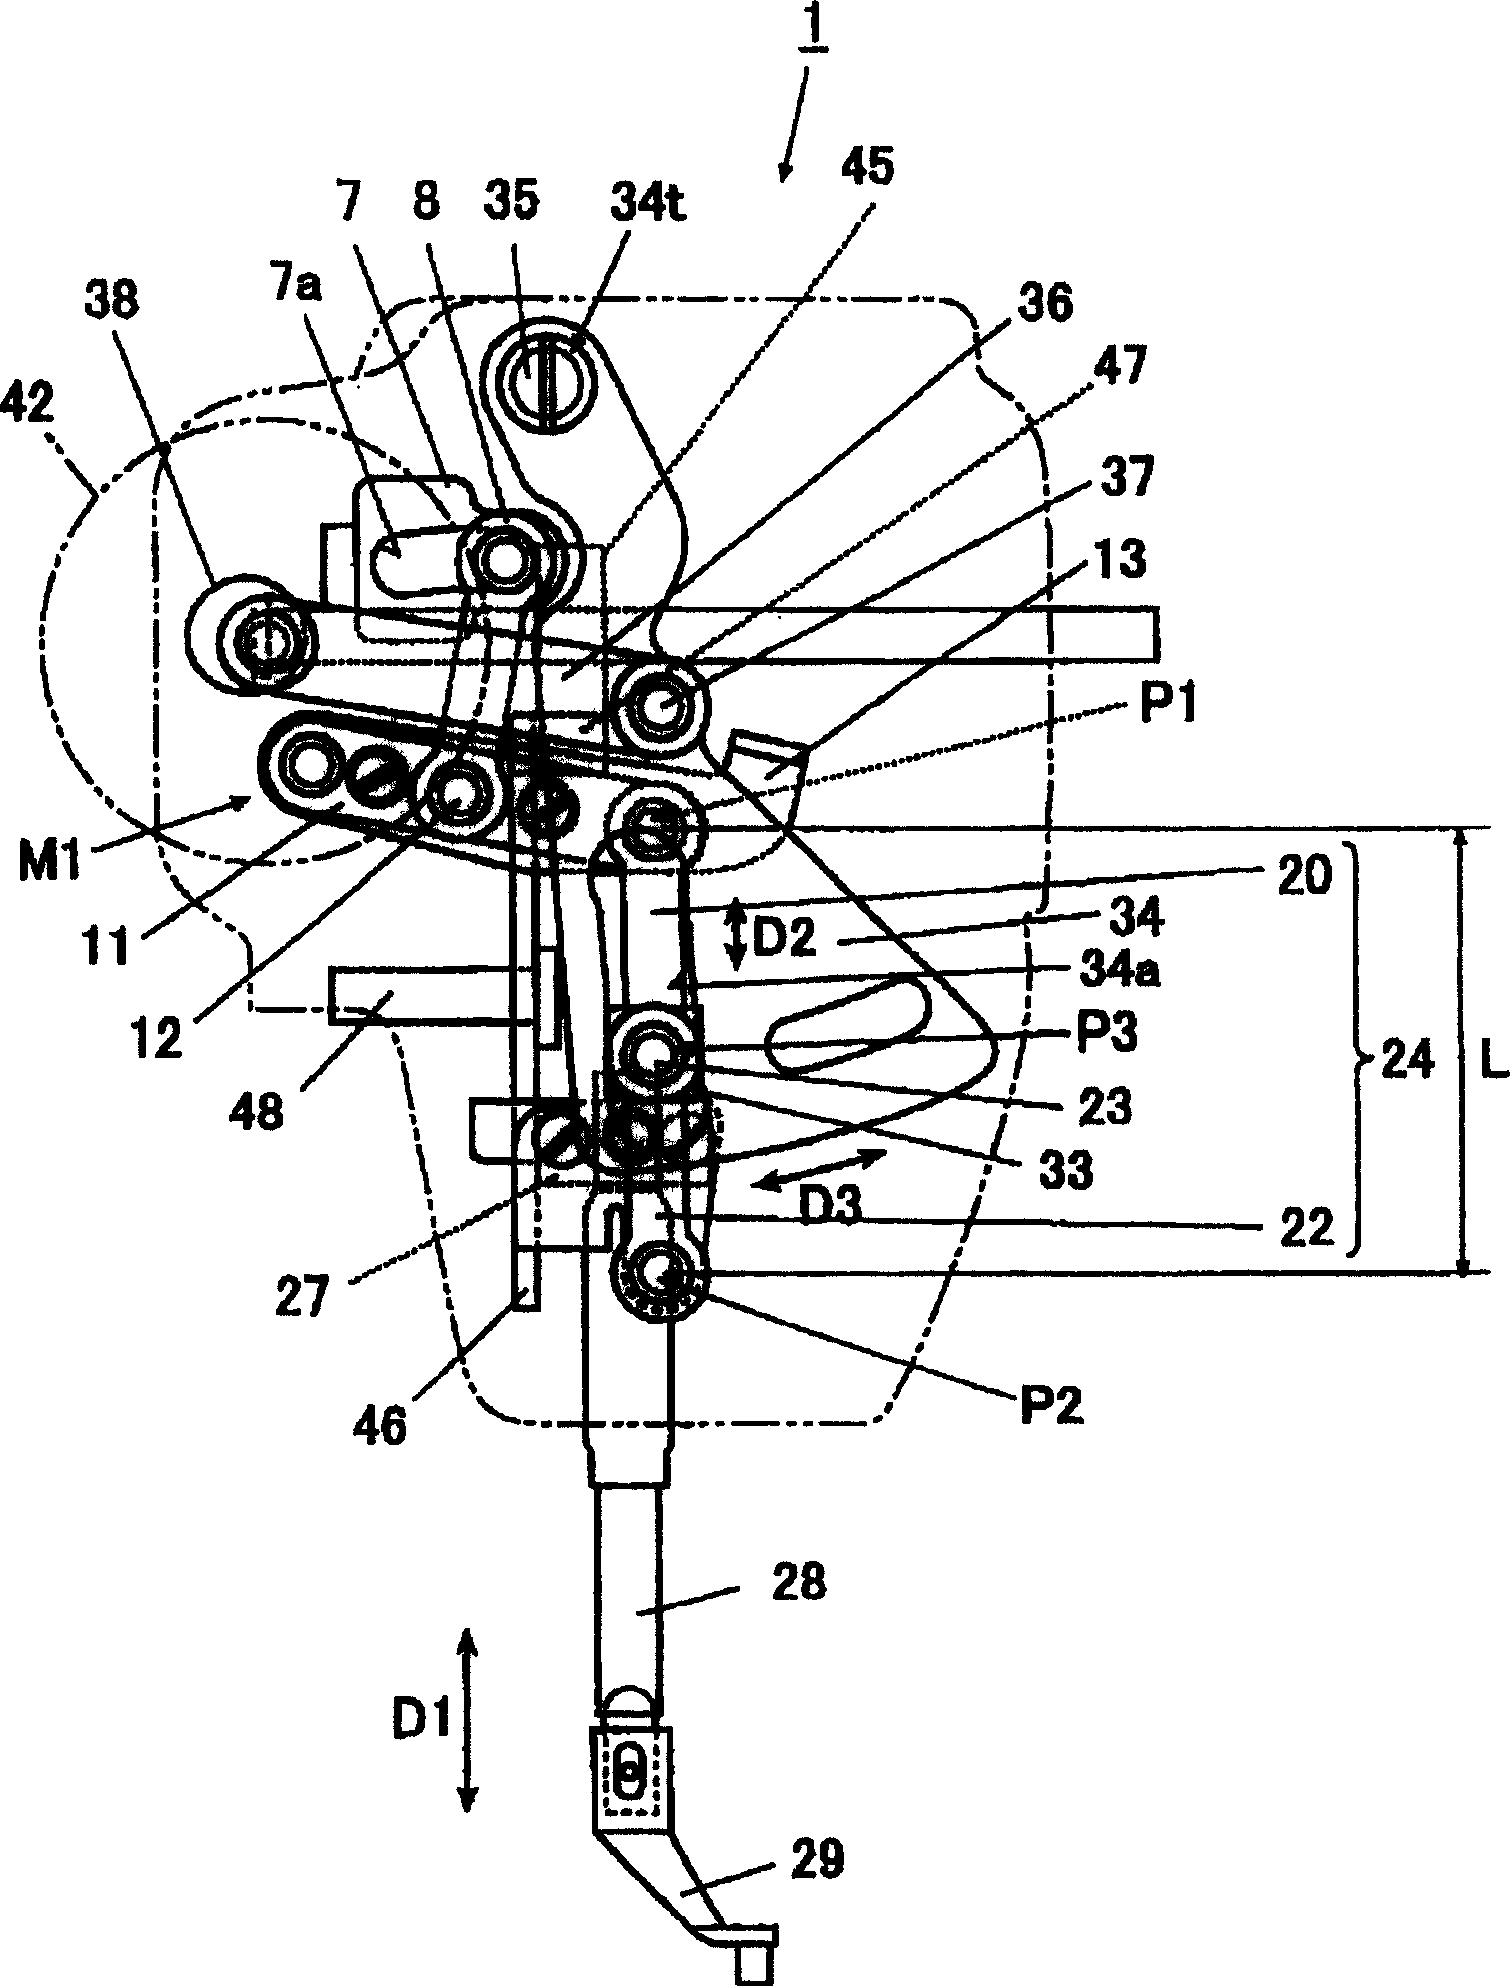 Middle foot-pressing device for sewing machine